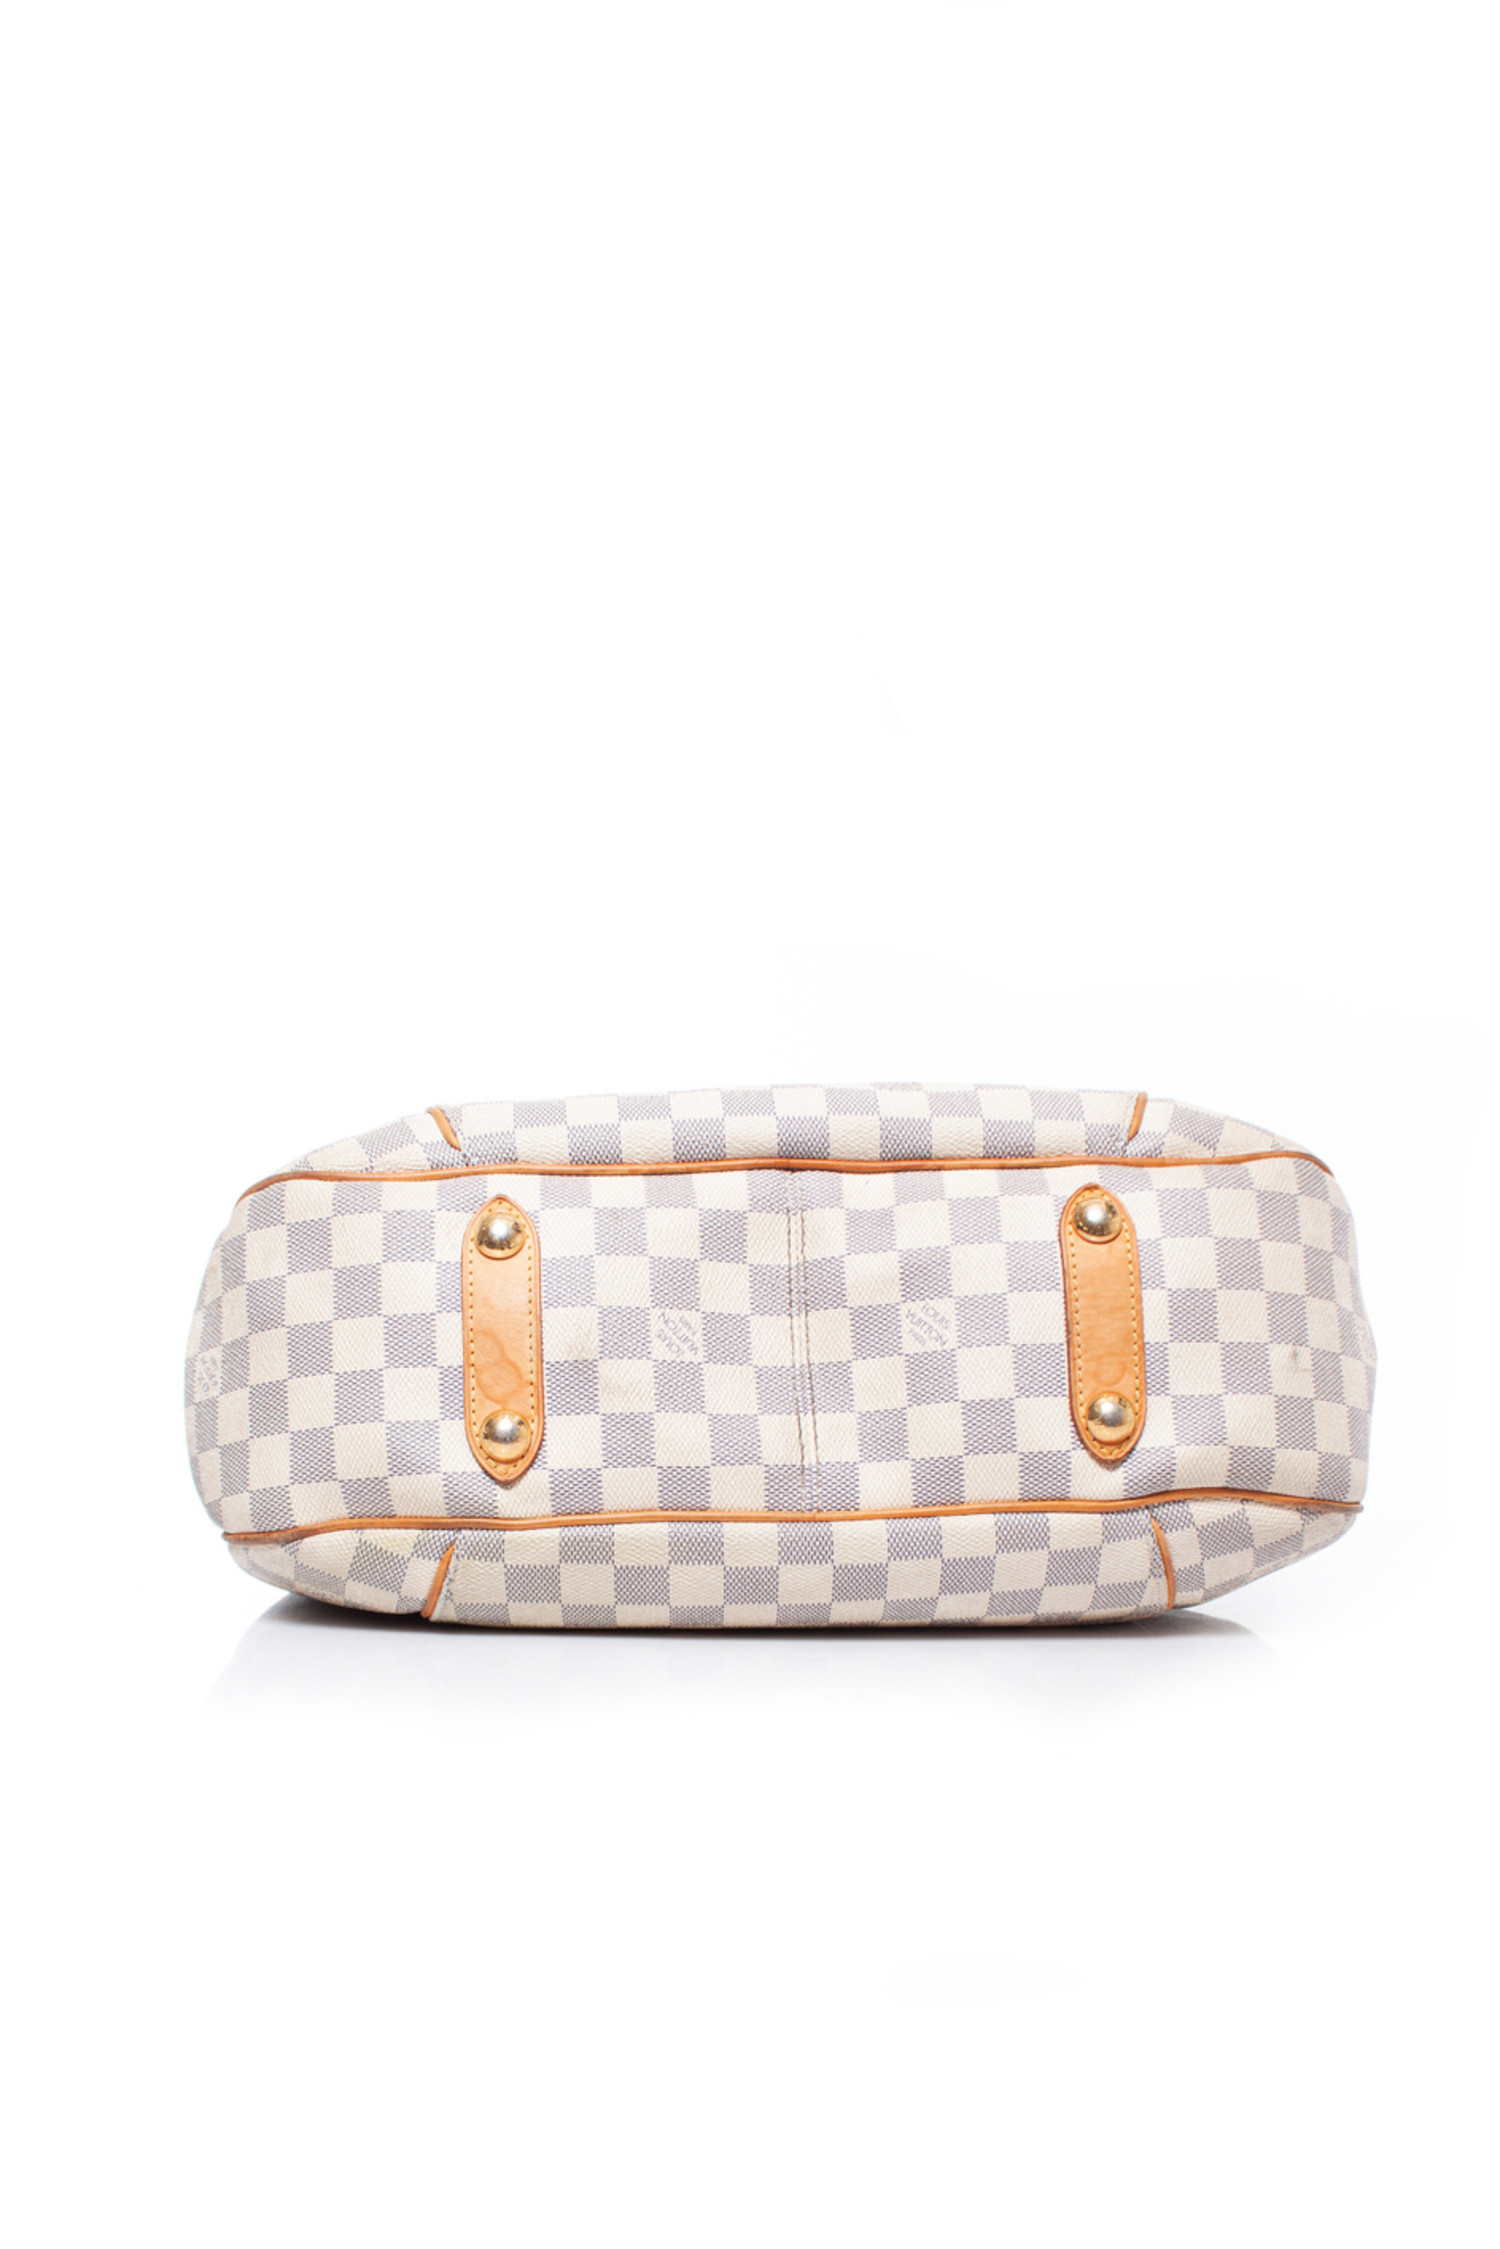 Louis Vuitton Galliera PM Shoulder Bag in White | Lord & Taylor